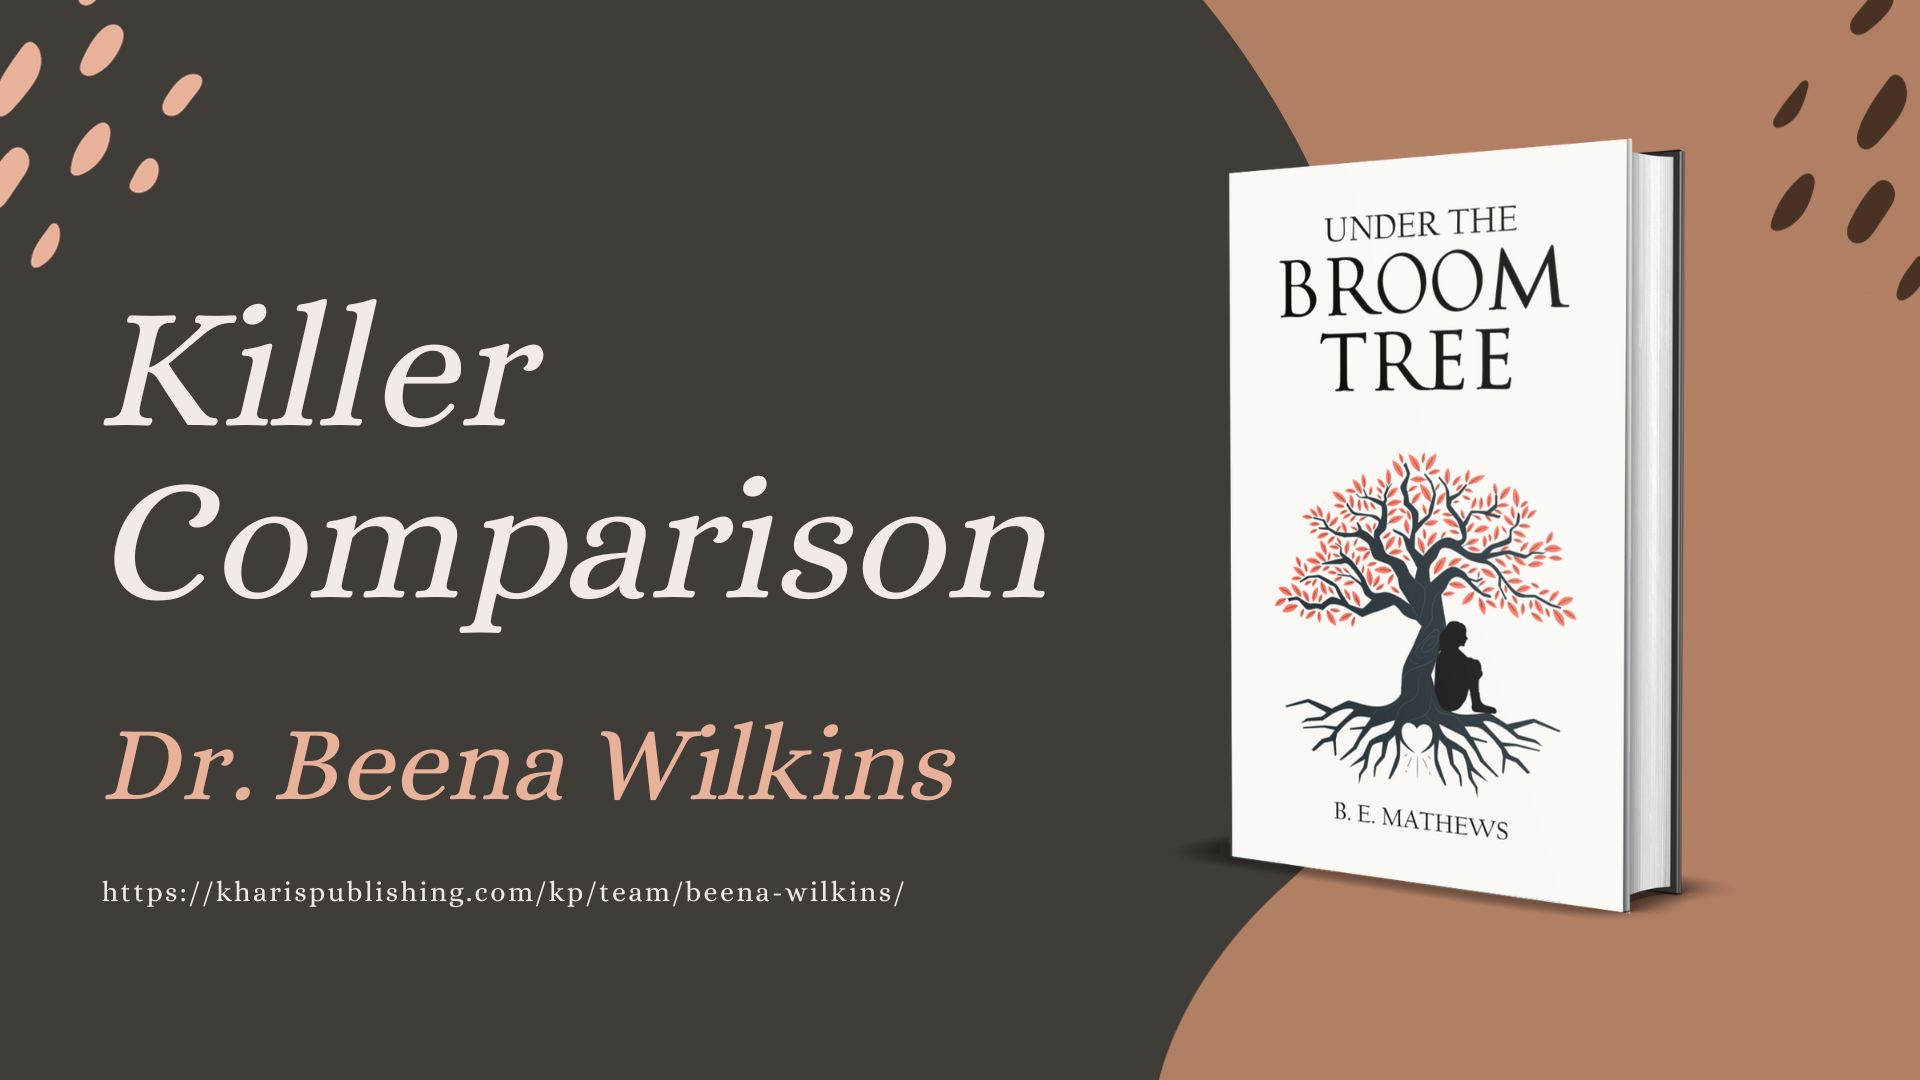 The Killer Comparison - Under the Broom Tree by Beena Wilkins